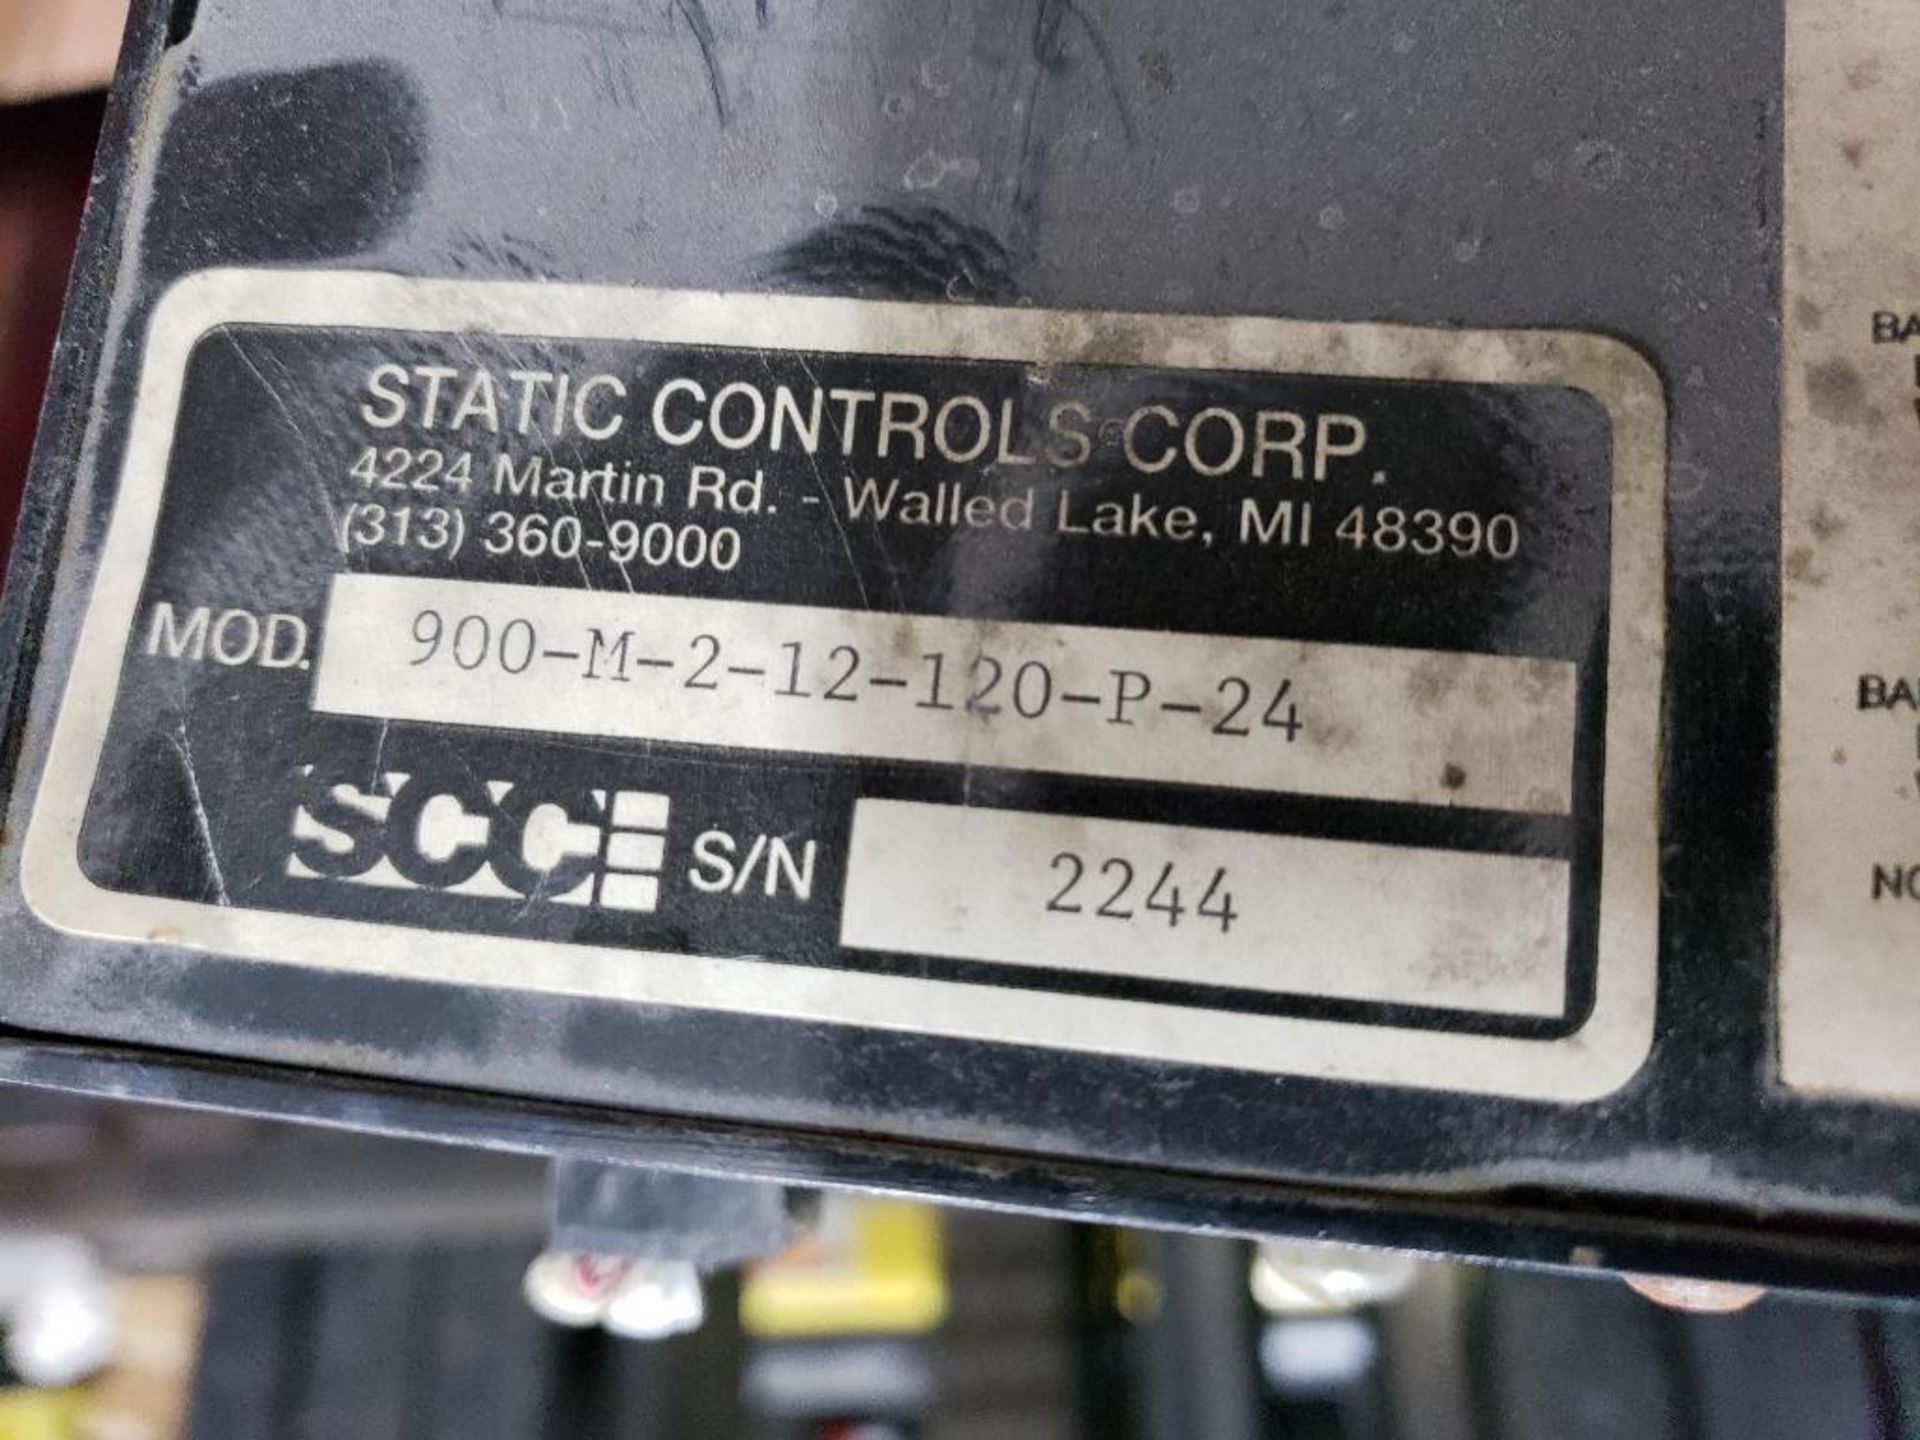 SCC Static Controls Corp controller model 900-M-2-12-120-P-24. - Image 4 of 4